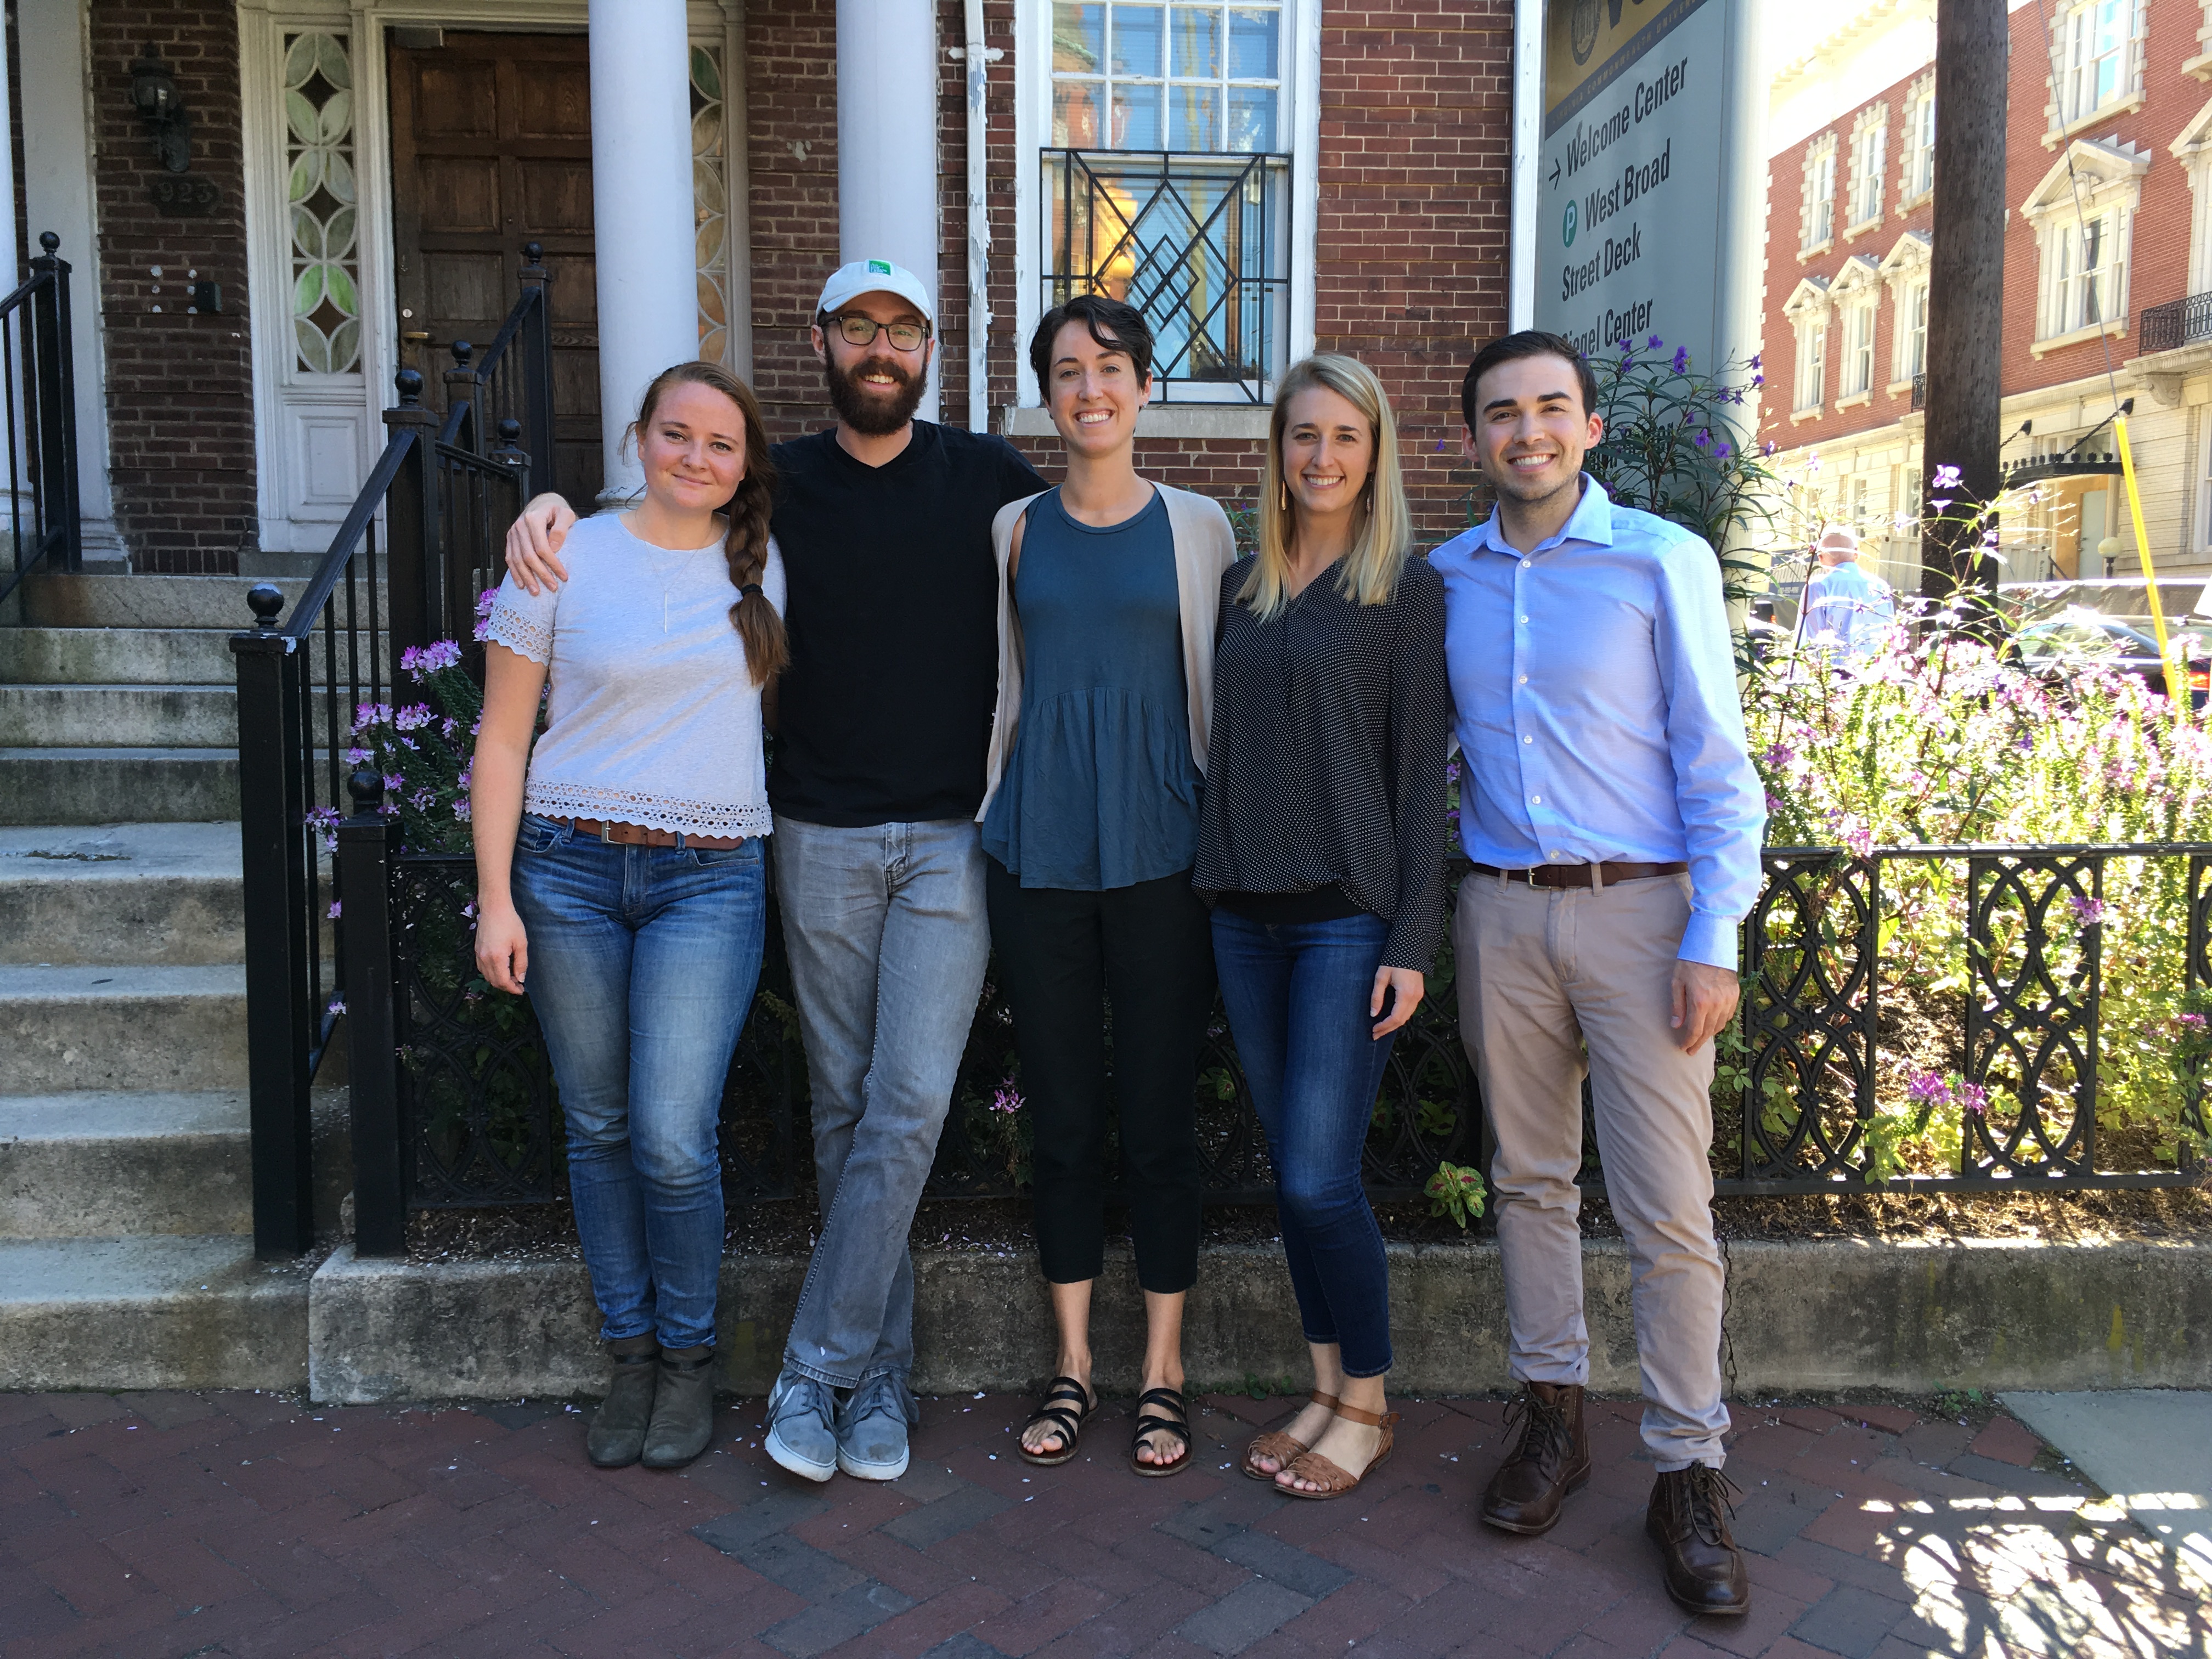 Offices of the Urban and Regional Planning Student Association are, from left, Cassandra (Cassi) Patterson, Max Ewart, Grace Leonard, Hannah Cameron, and Nathan (Nate) Manning.